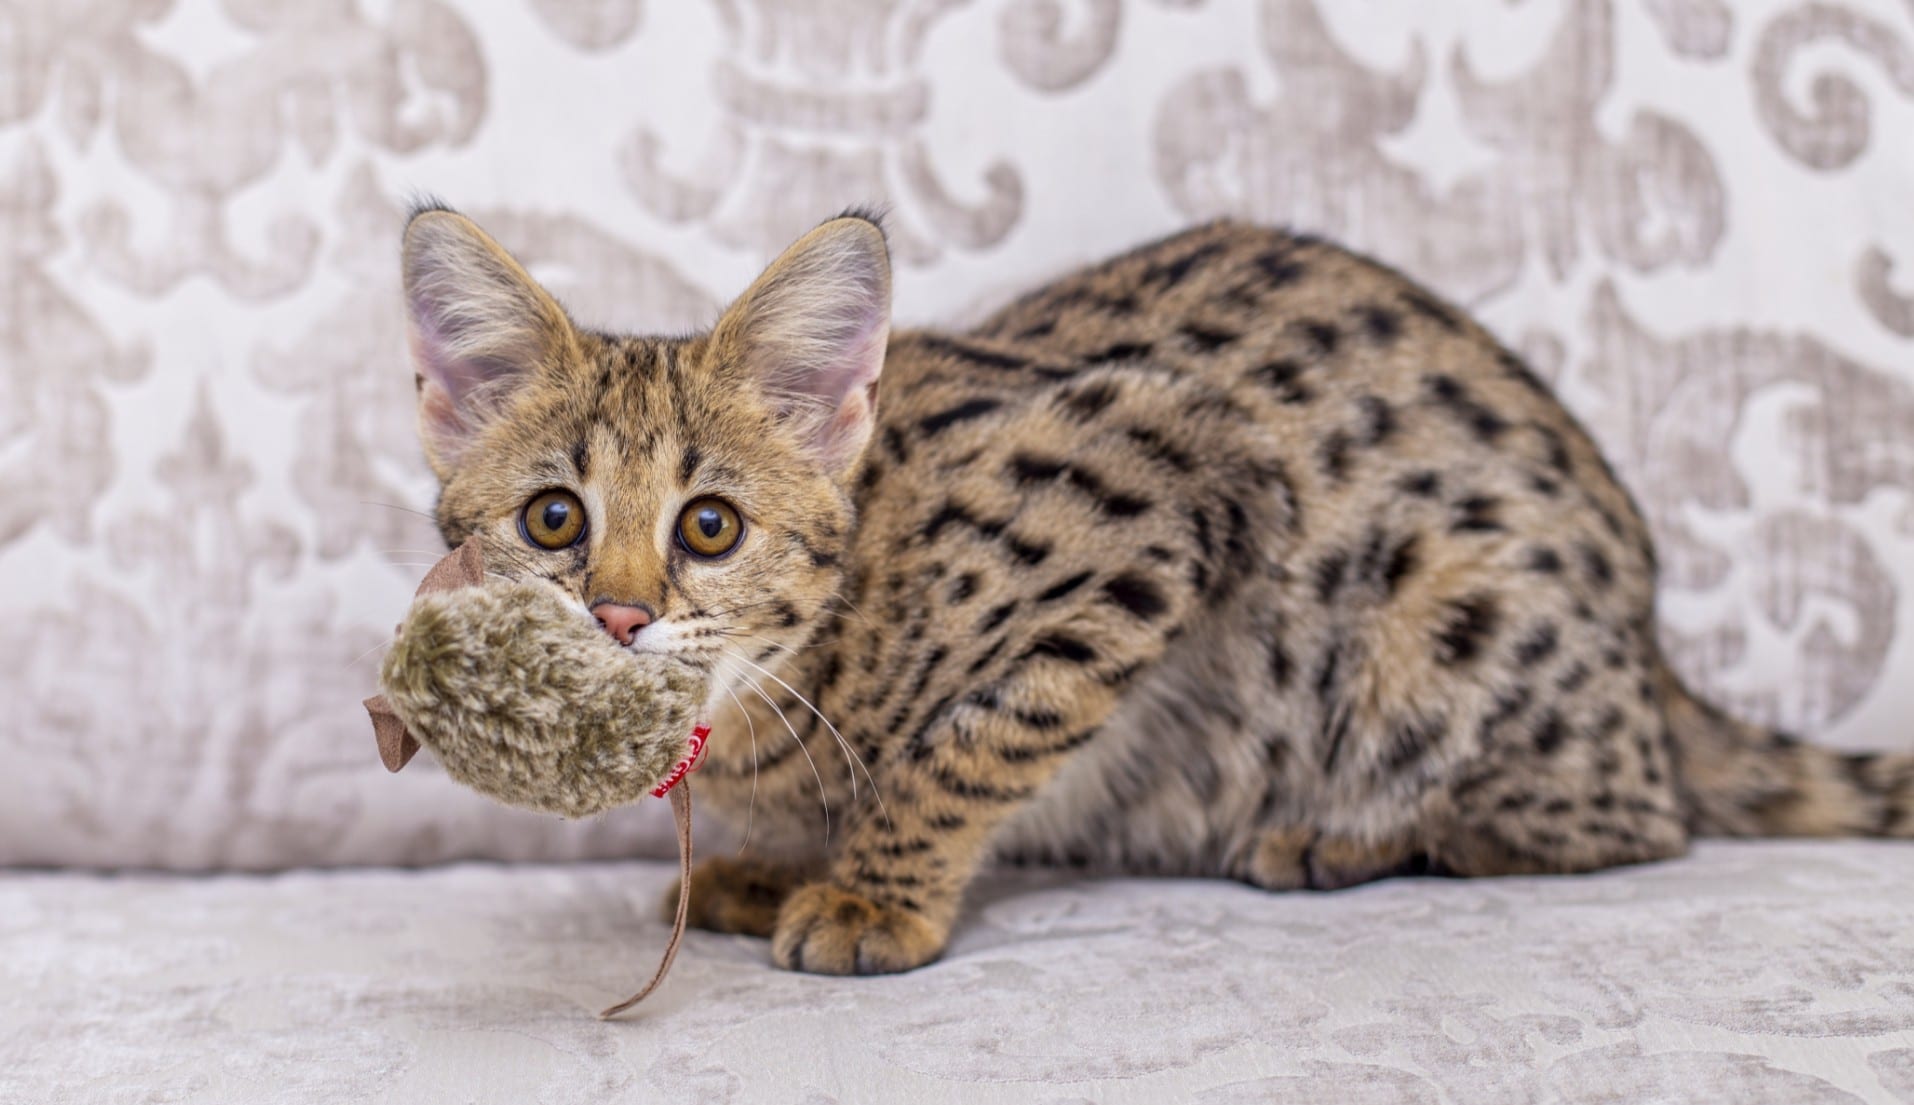 Savannah Cats - Exotic Kittens for Sale - Cat Breeder